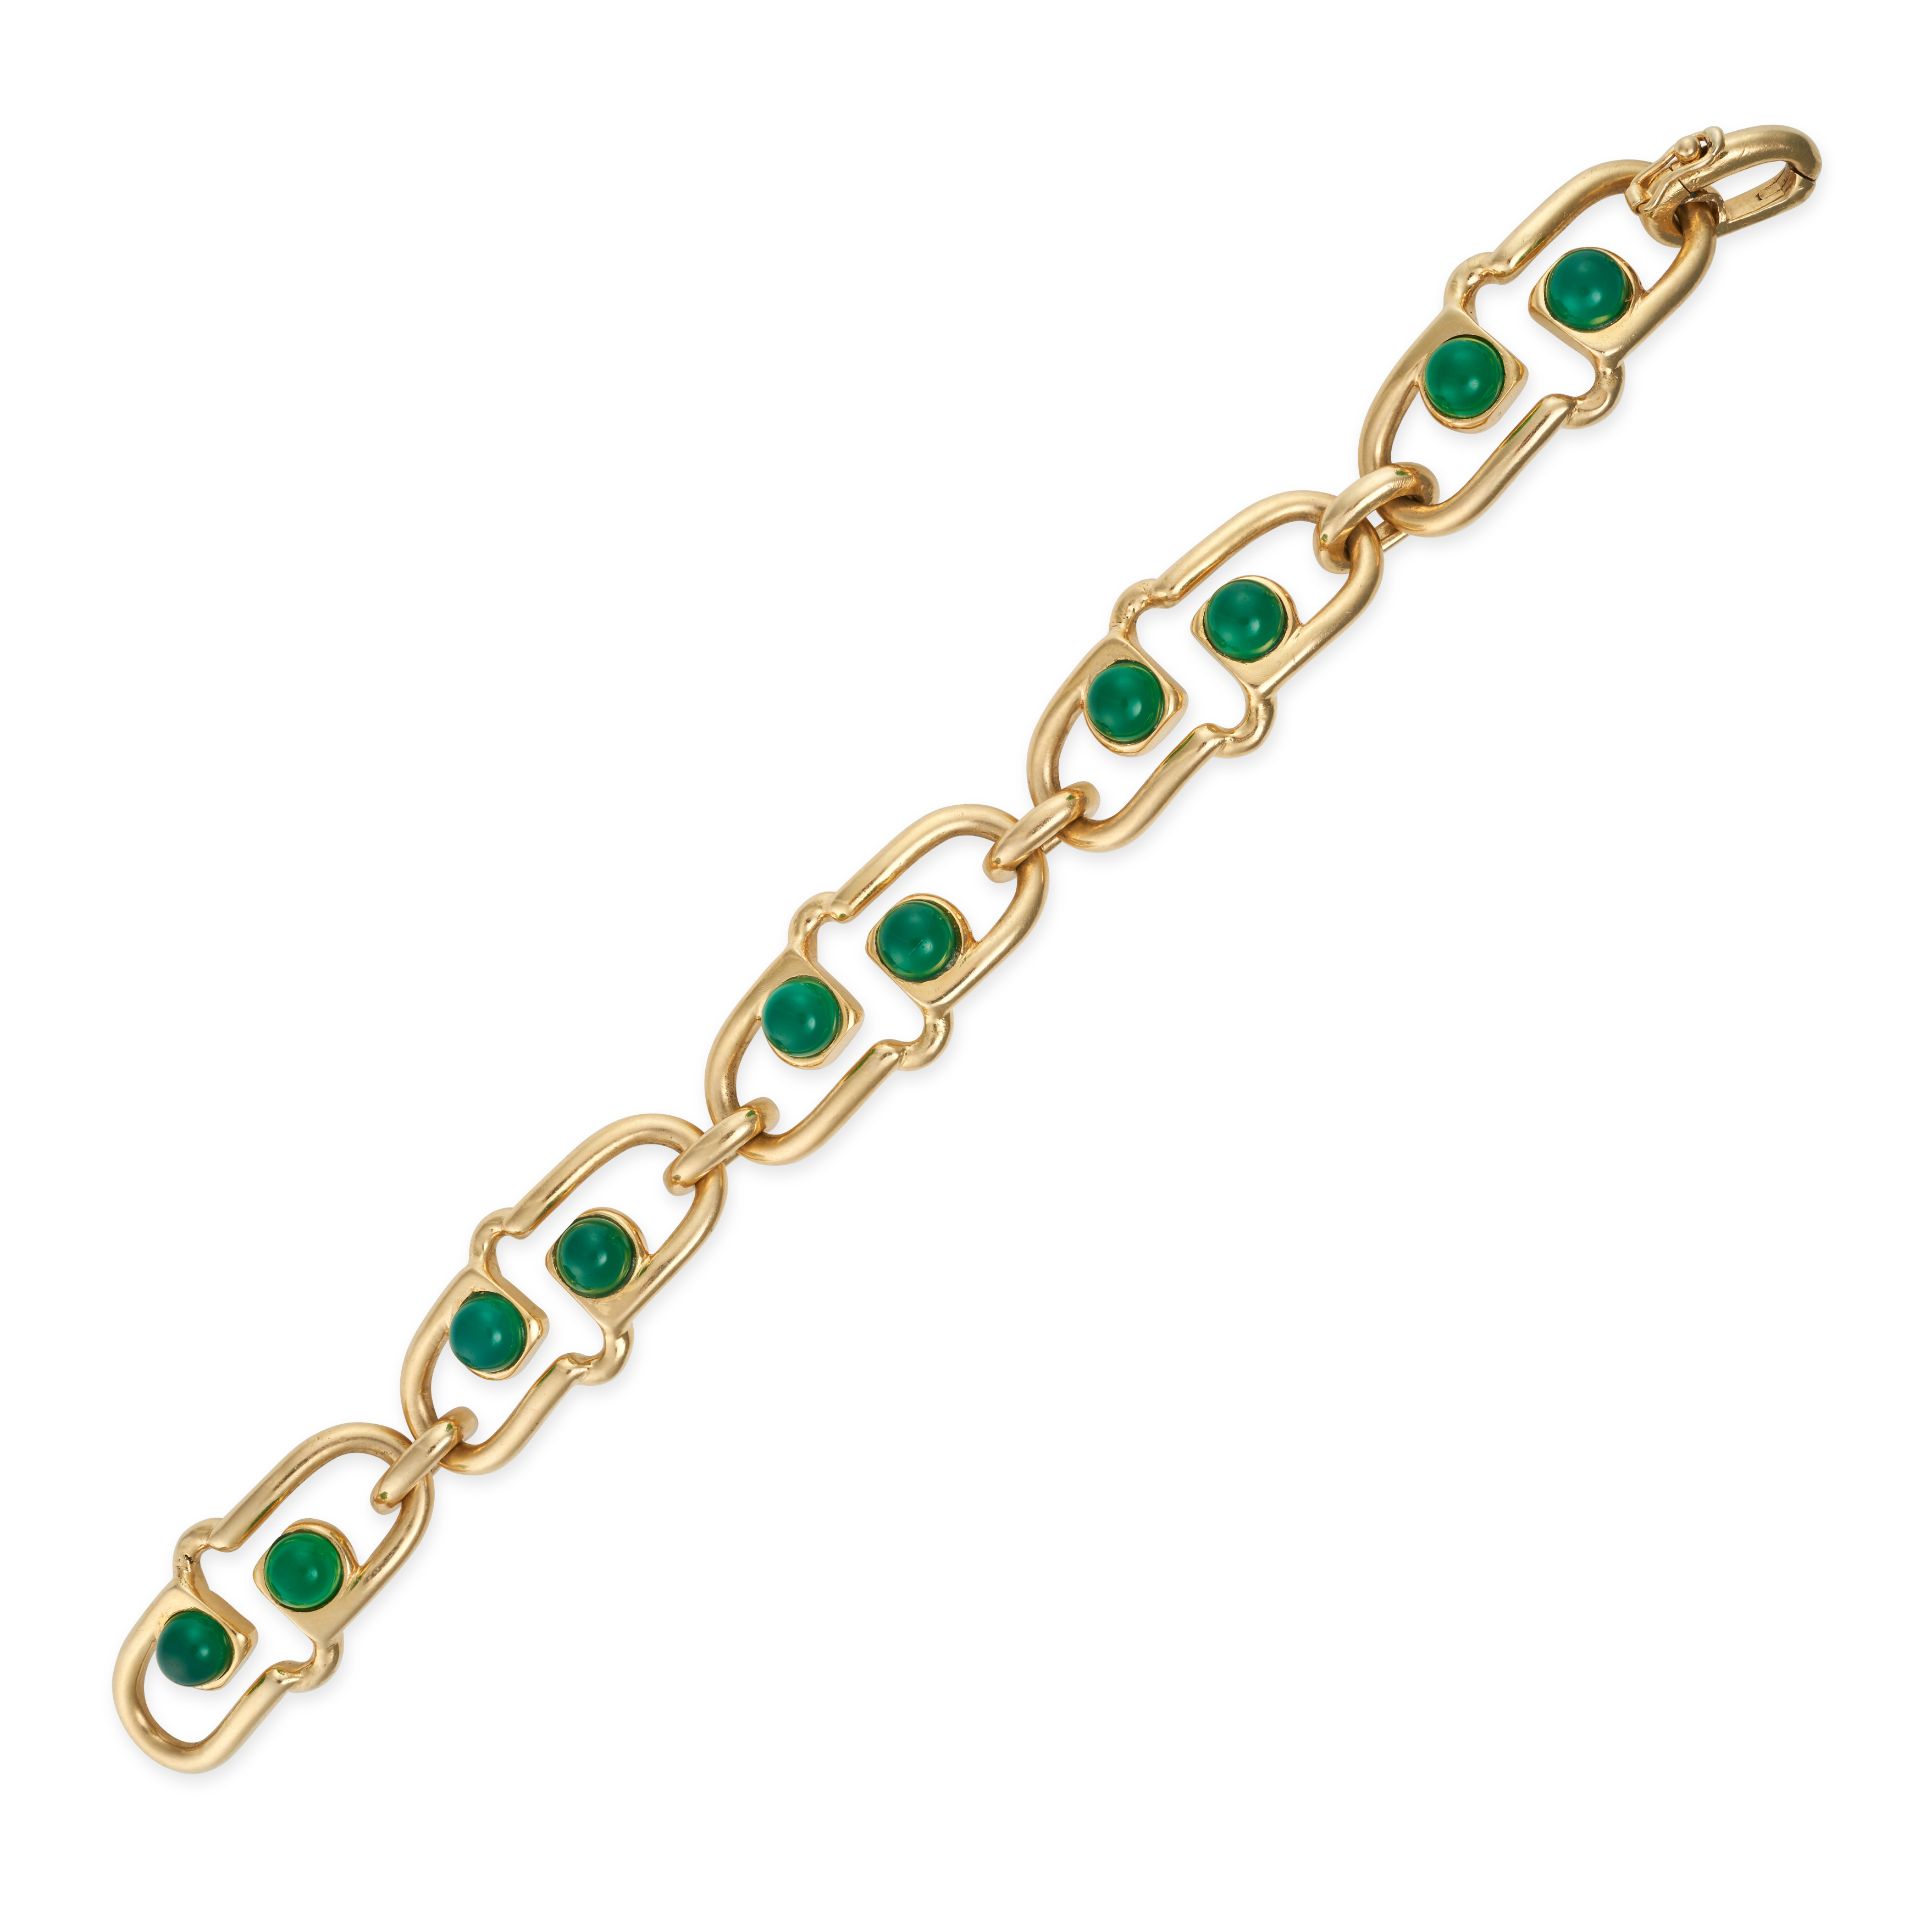 VAN CLEEF & ARPELS, A CHRYSOPRASE BRACELET in 18ct yellow gold, comprising a row of oval links, e...